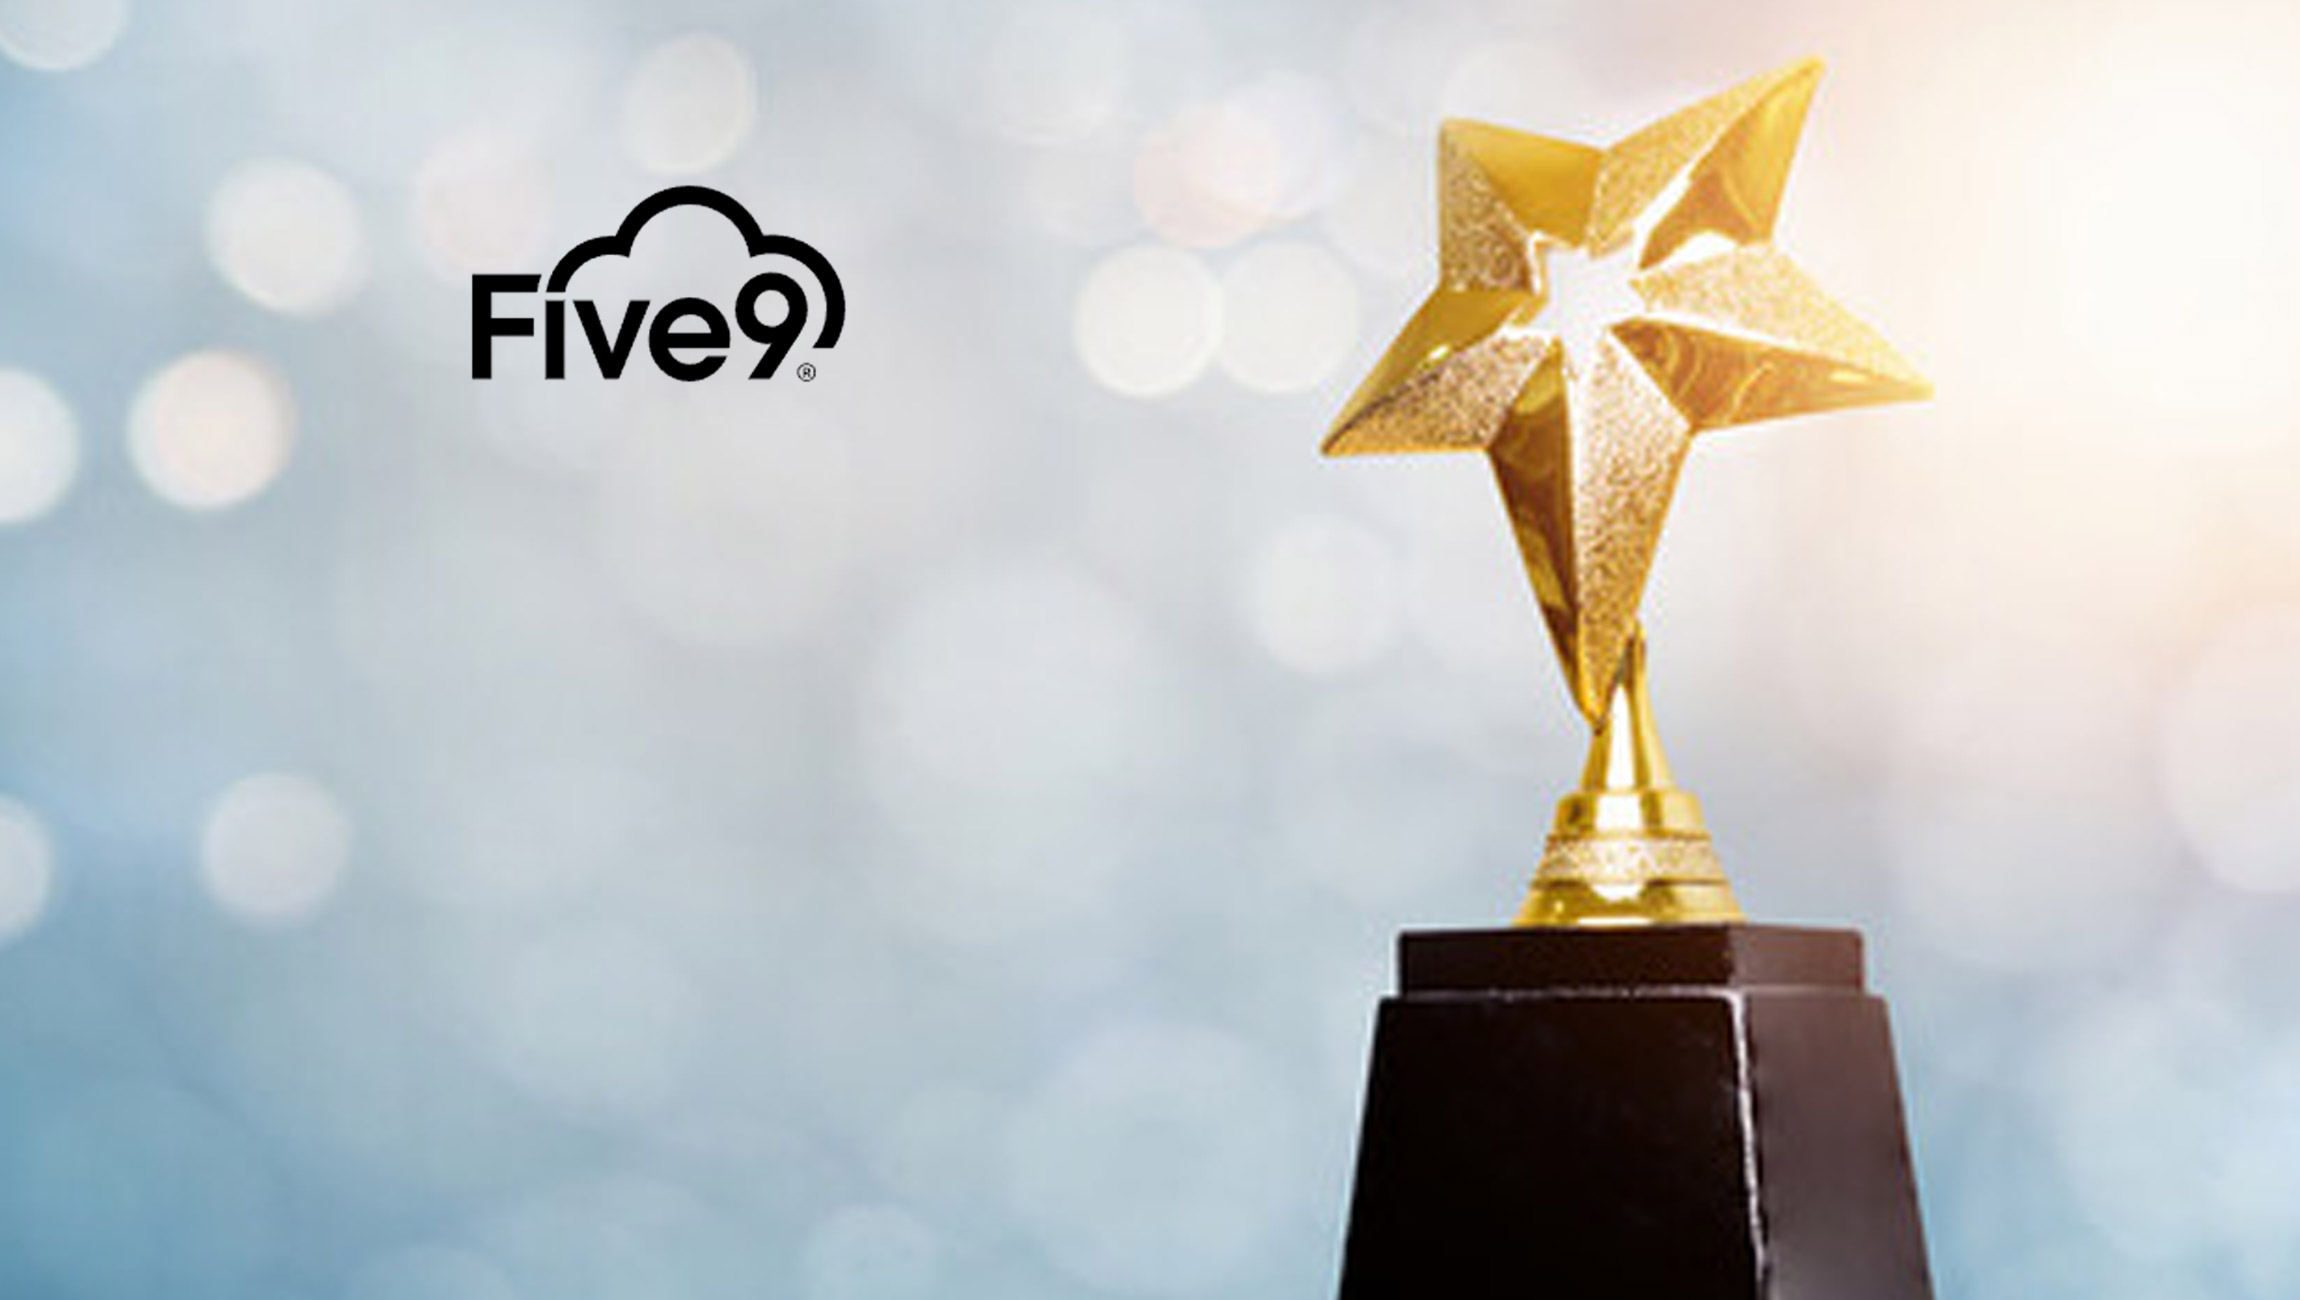 Five9 Awarded by Frost & Sullivan for Empowering Exceptional Customer and Agent Experiences Through its VoiceStream APIs